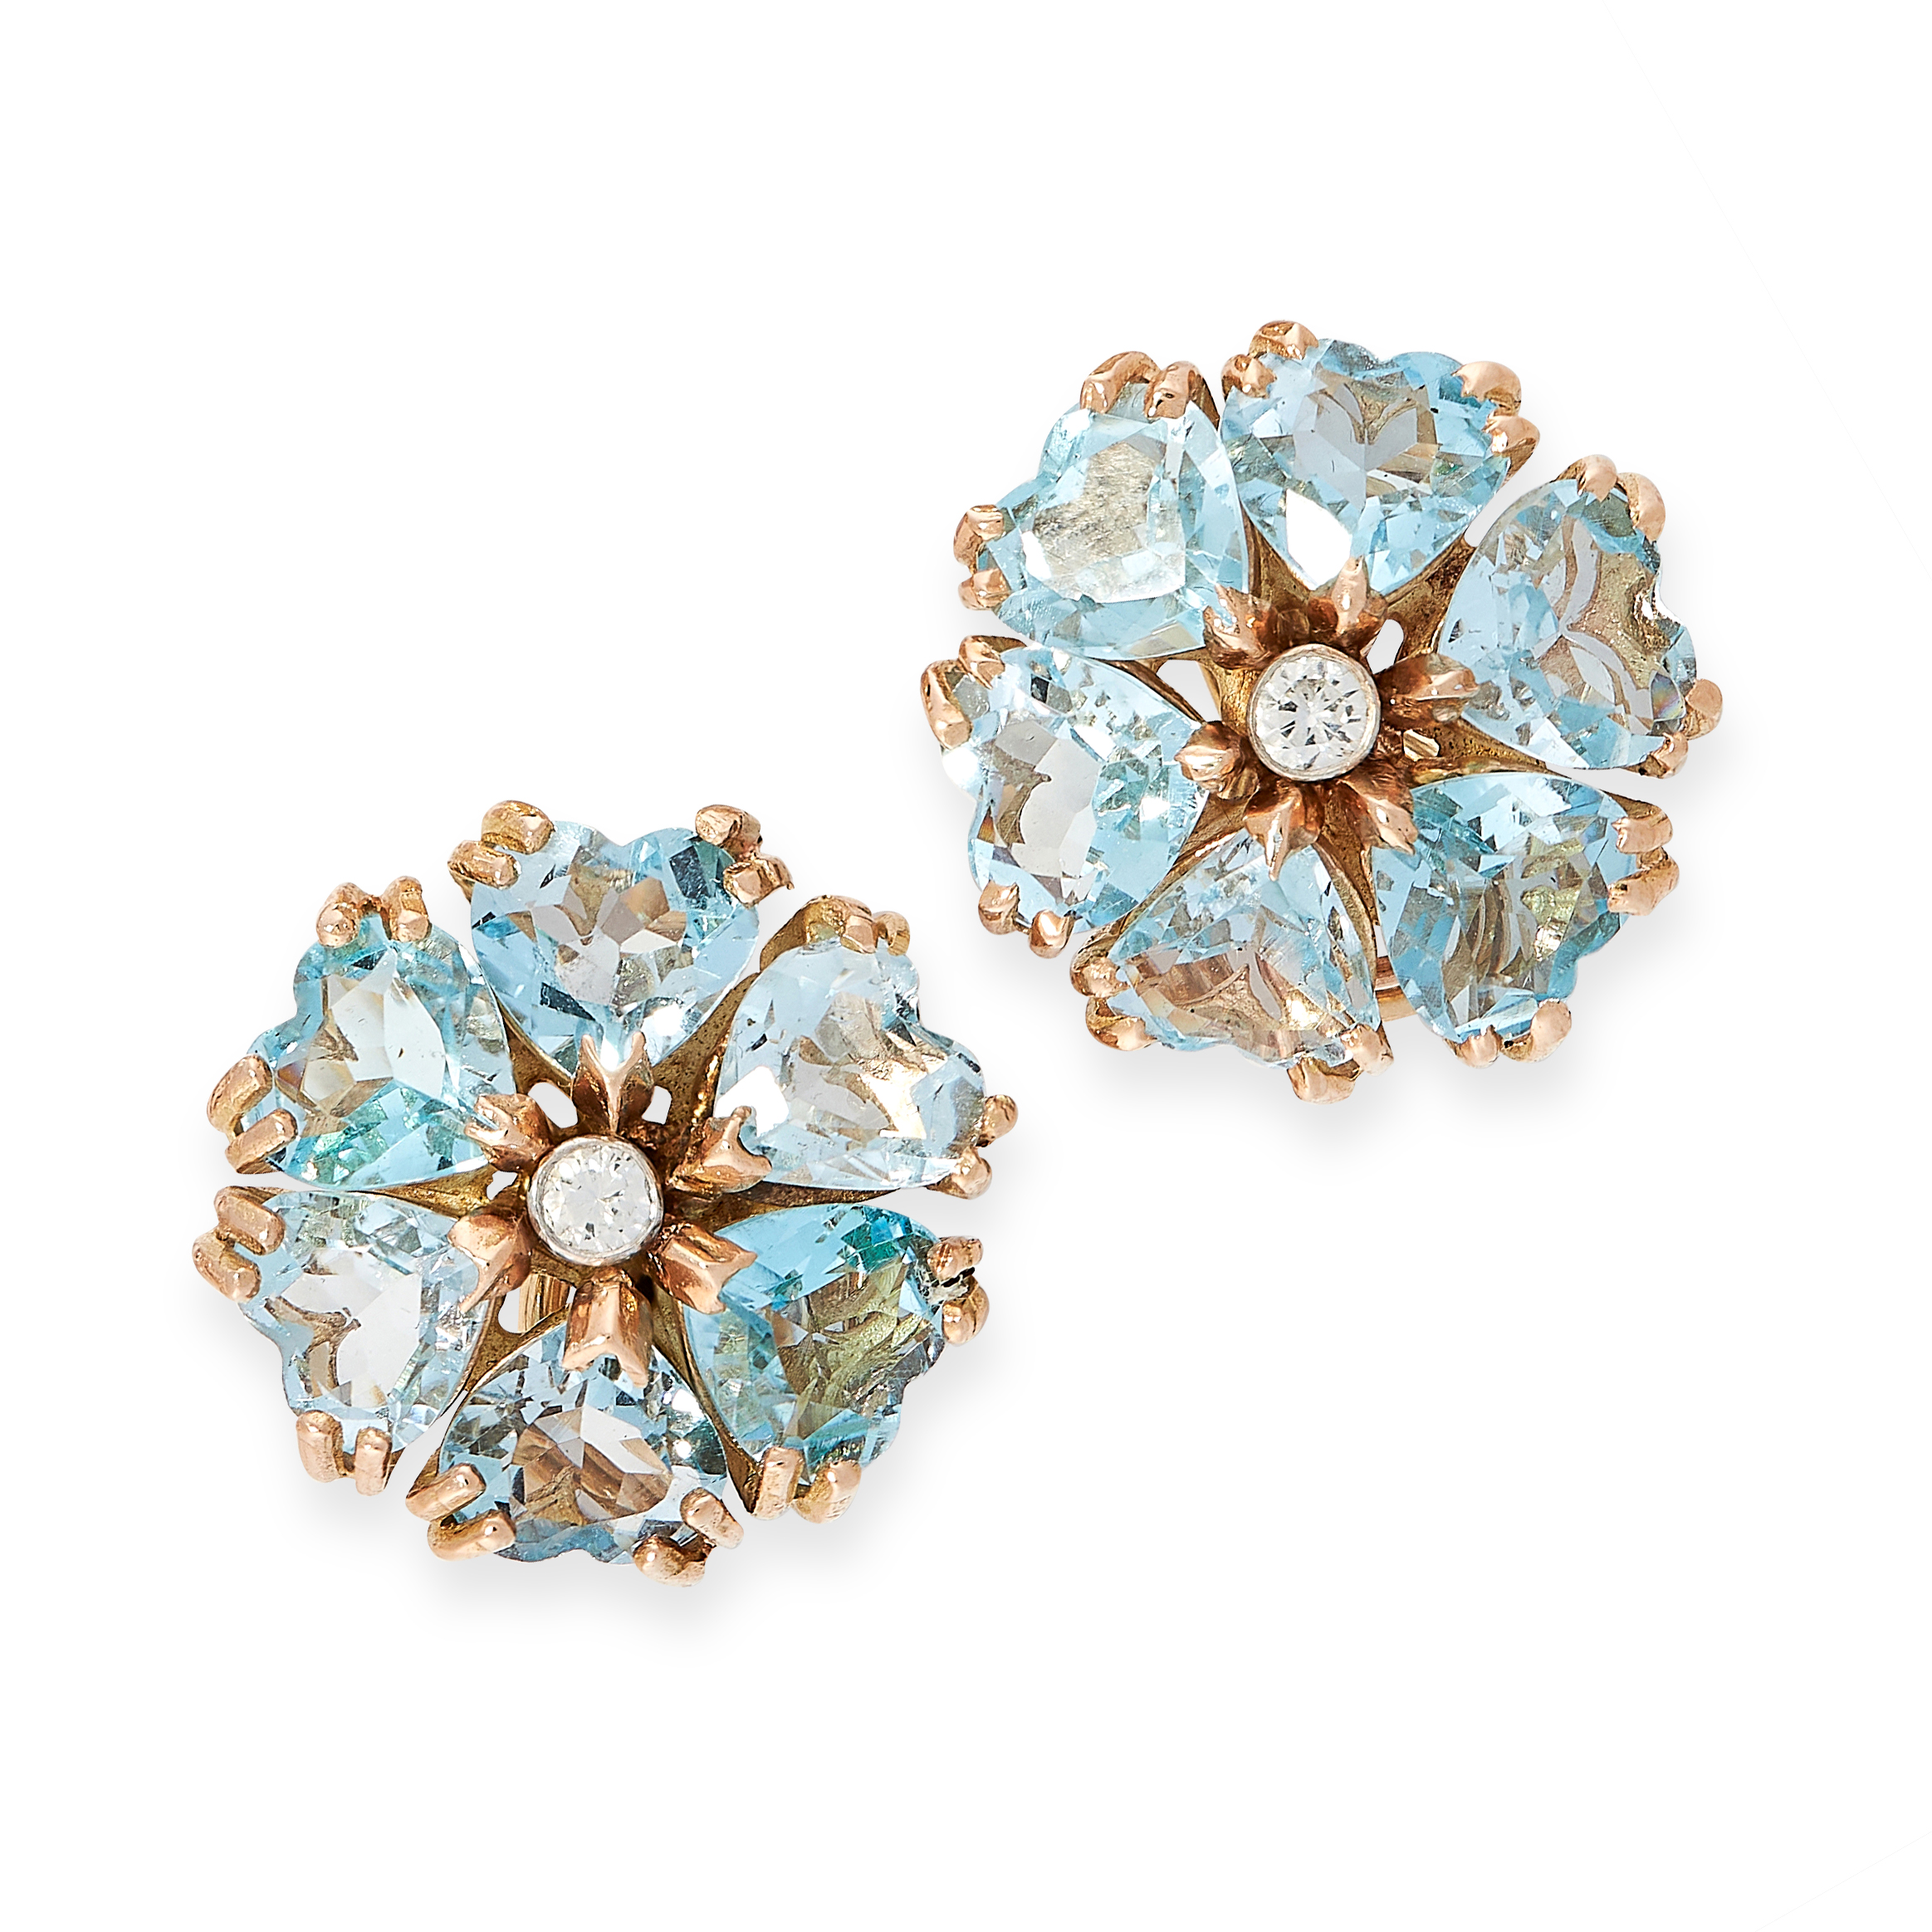 PAIR OF VINTAGE AQUAMARINE AND DIAMOND EARRINGS in yellow gold, each set with a round cut diamond,